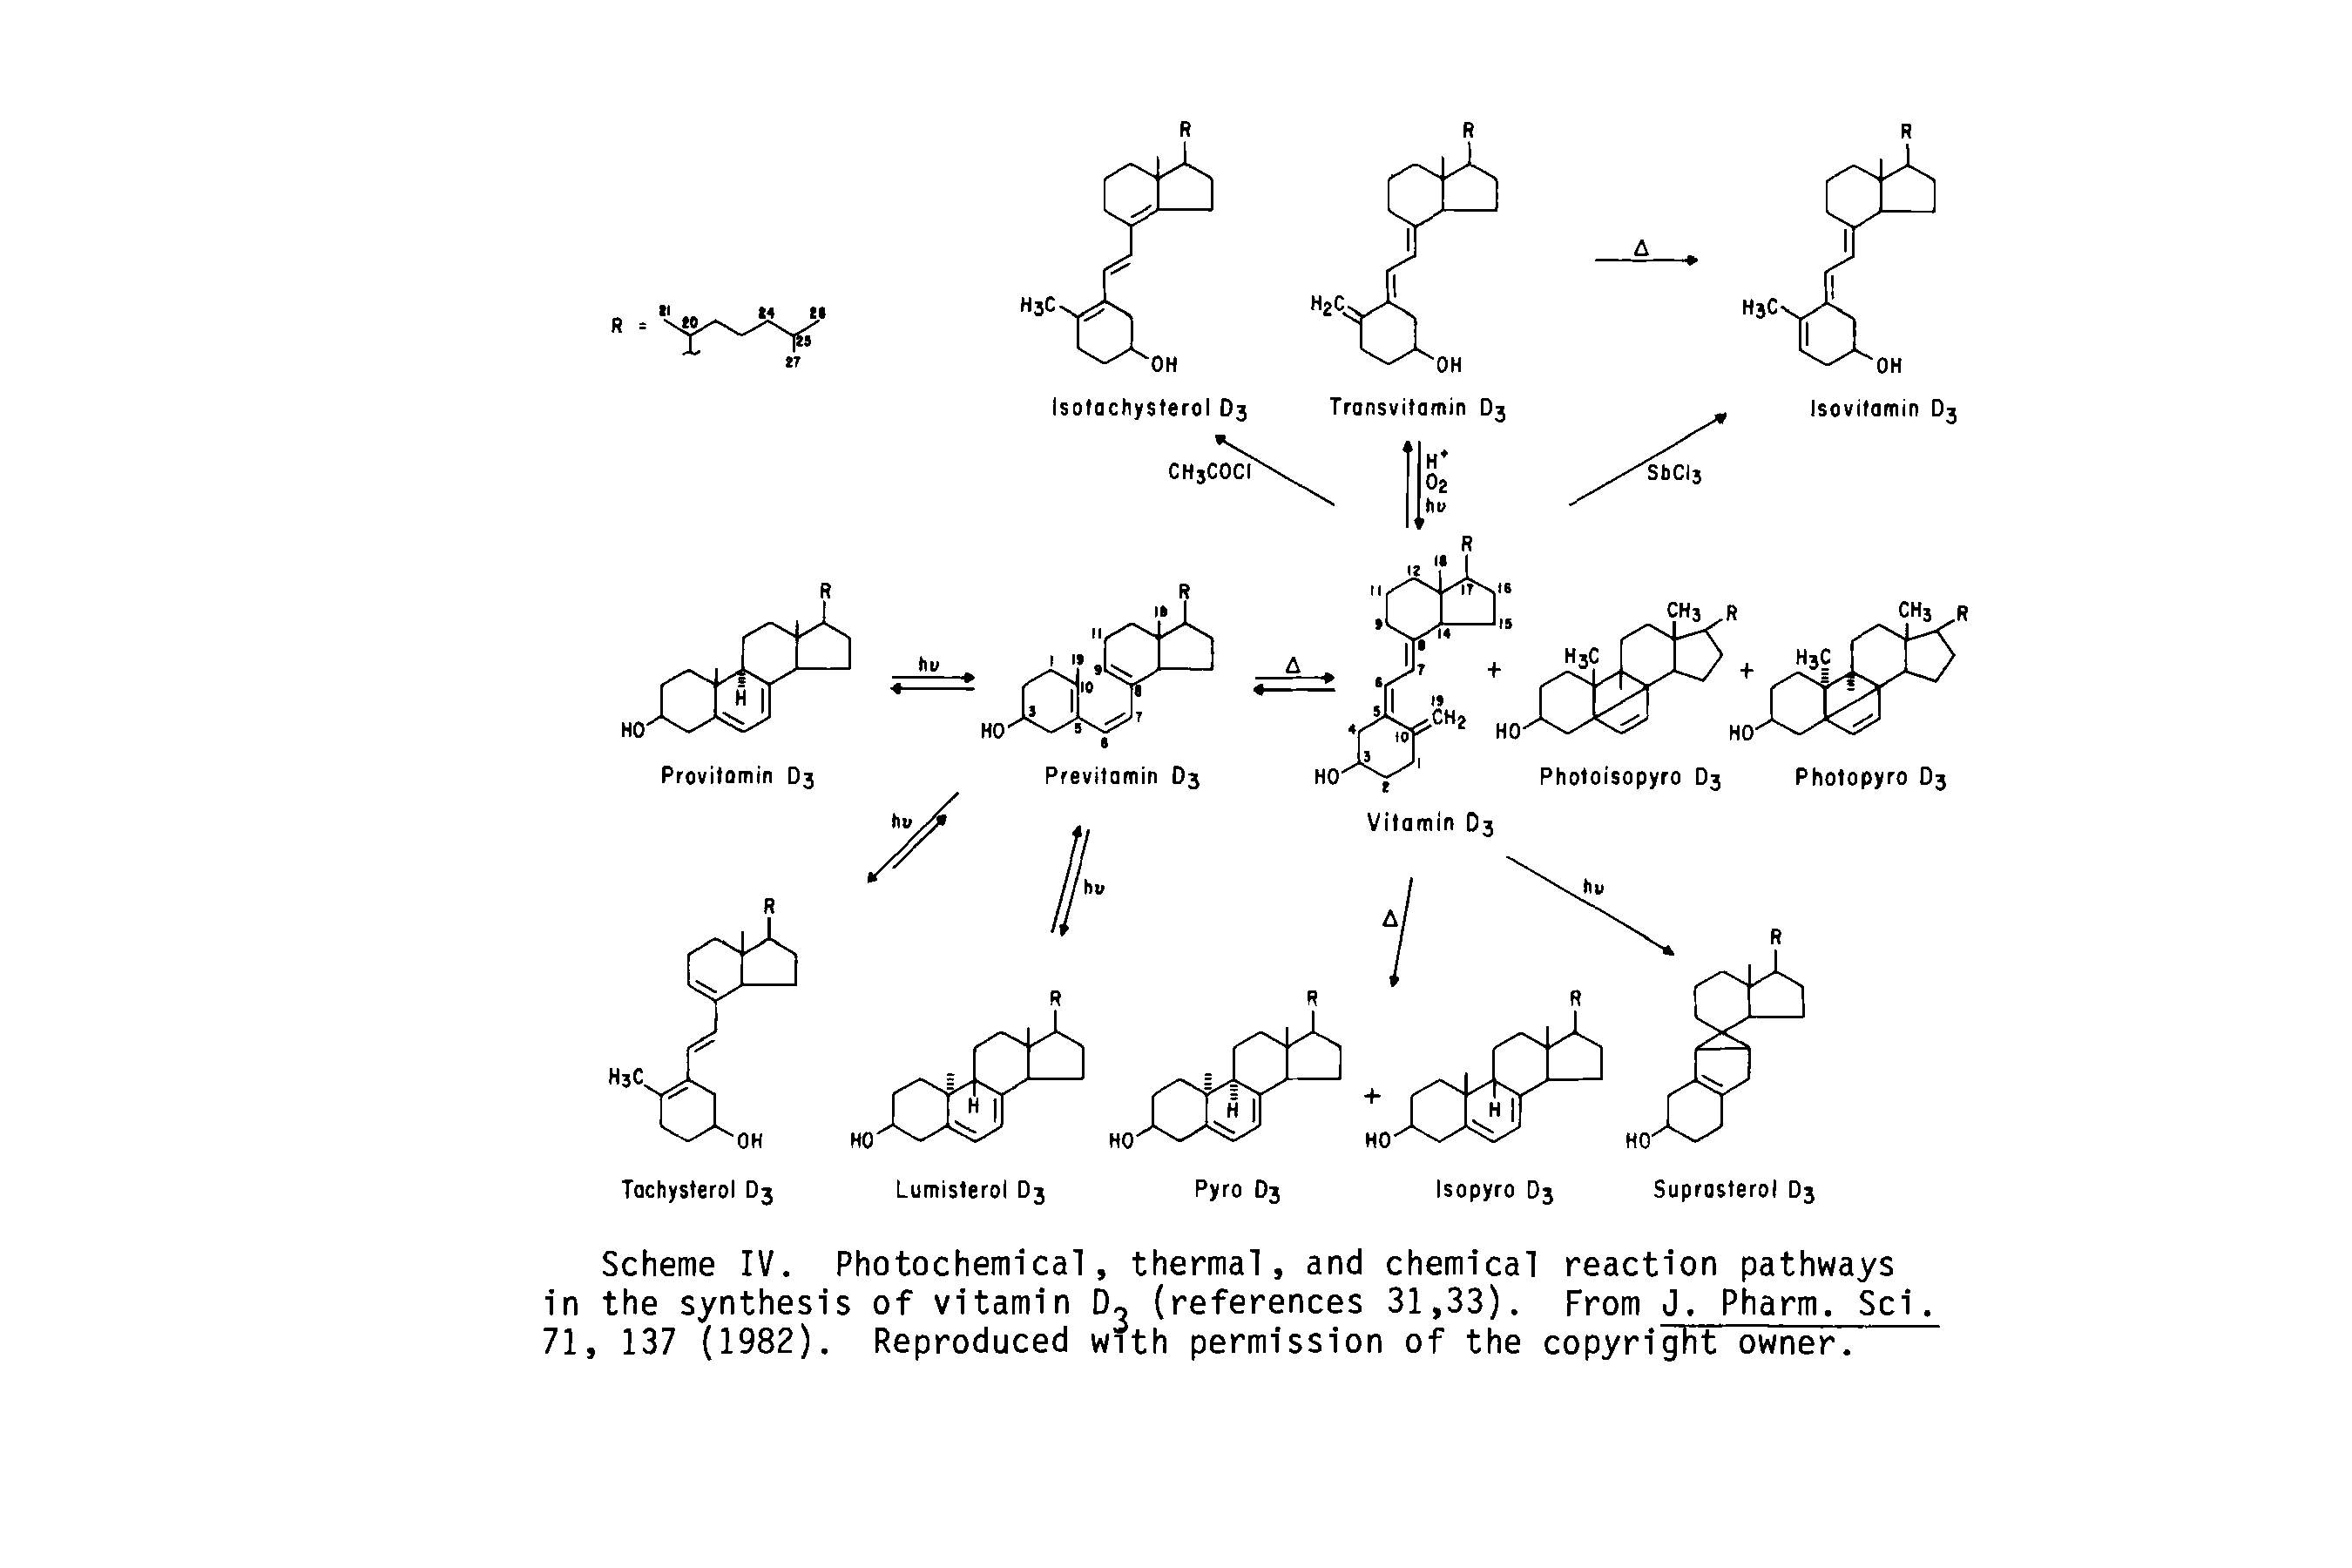 Scheme IV. Photochemical, thermal, and chemical reaction pathways in the synthesis of vitamin D, (references 31,33). From J. Pharm. Sci. 71, 137 (1982). Reproduced with permission of the copyright owner.